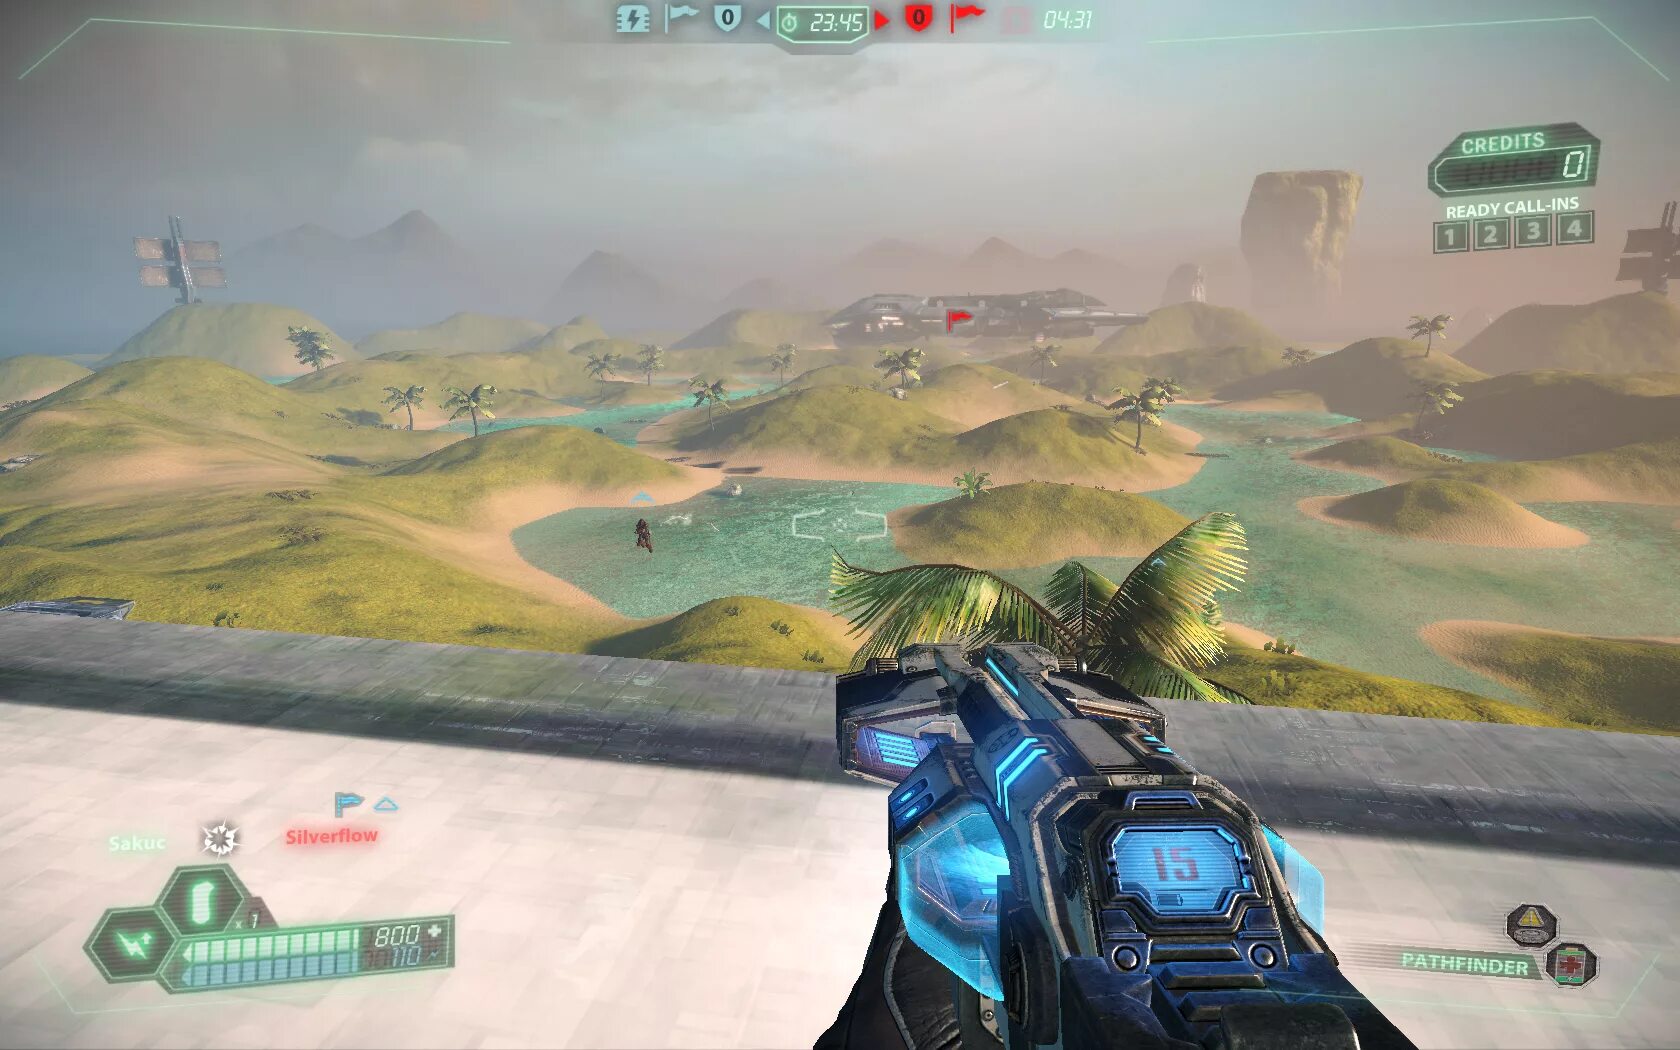 Ready call. Игра Tribes Ascend. Tribes Ascend 2. Tribes Ascend техника. Игры похожие на Tribes Ascend.